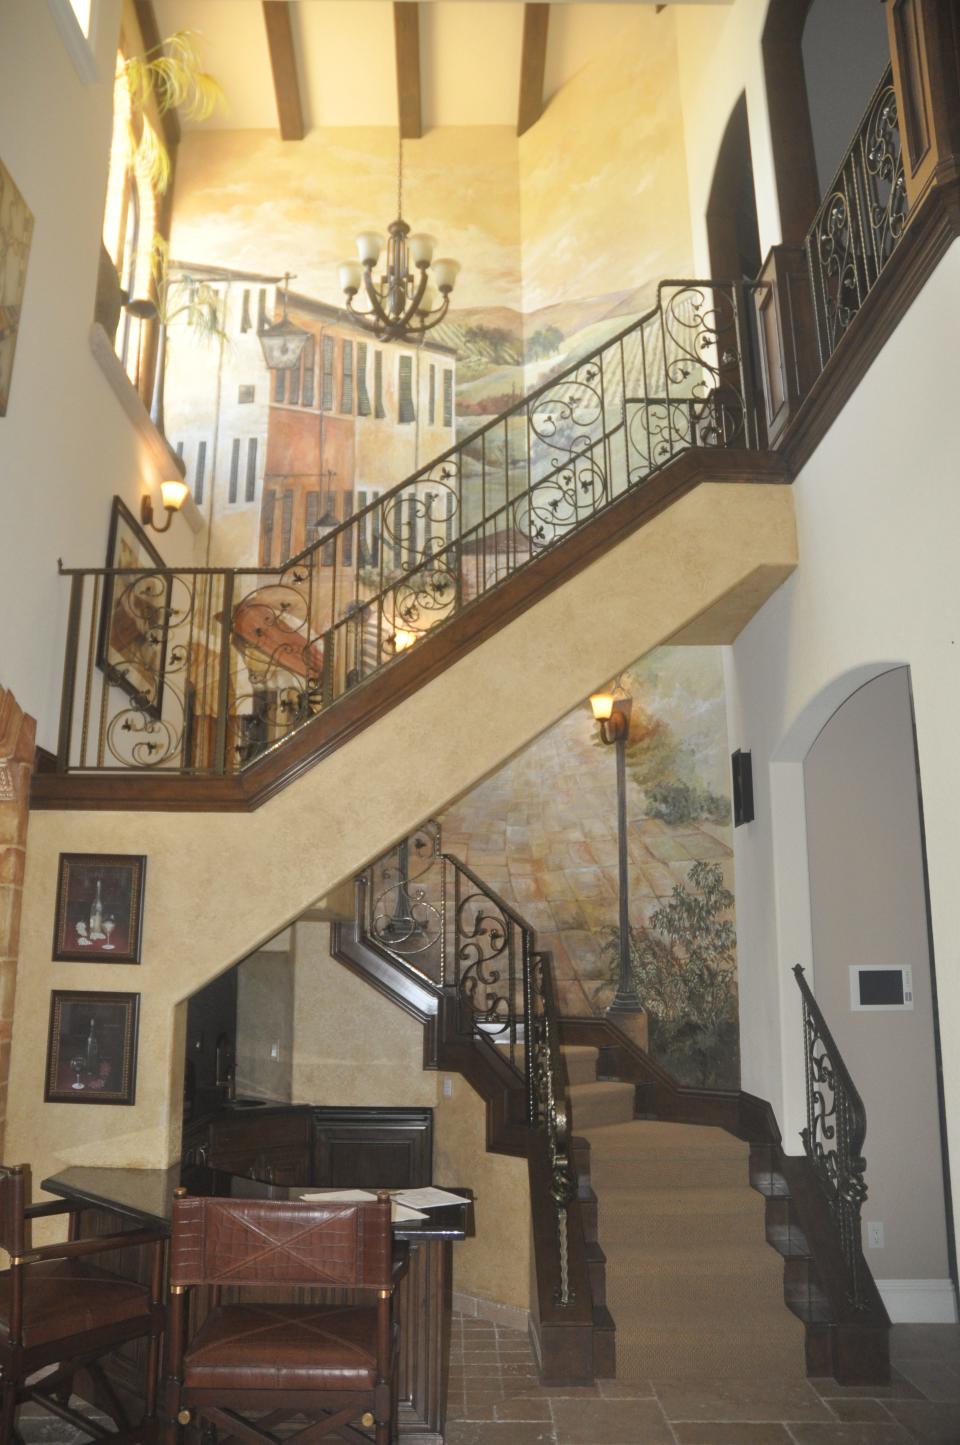 The two story wall beside the staircase was hand painted to look like a scene from Venice.